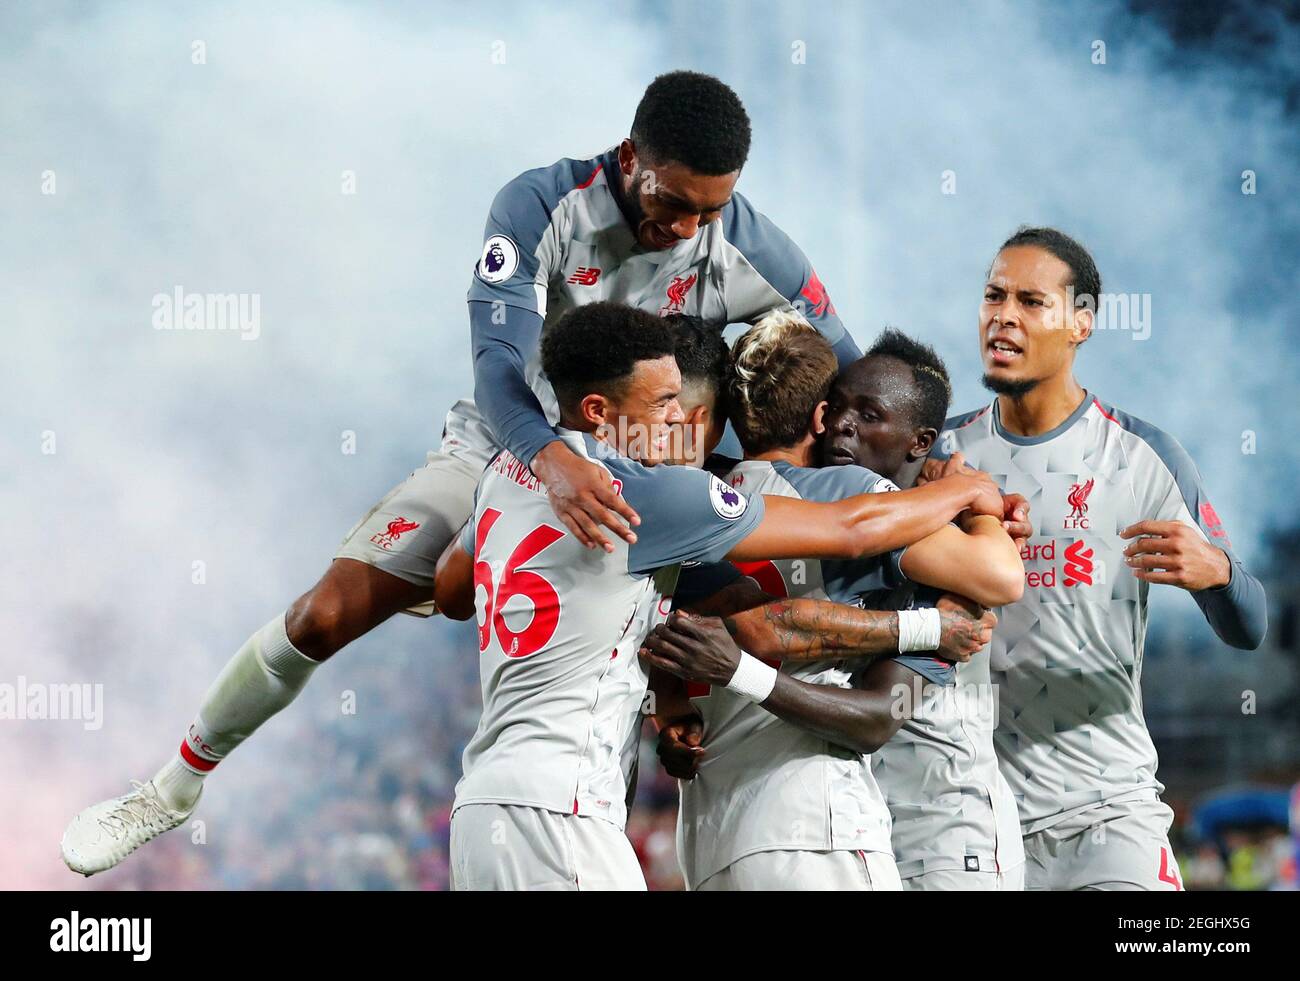 Soccer Football - Premier League - Crystal Palace v Liverpool - Selhurst Park, London, Britain - August 20, 2018  Liverpool's Sadio Mane celebrates scoring their second goal with team mates                     REUTERS/Eddie Keogh  EDITORIAL USE ONLY. No use with unauthorized audio, video, data, fixture lists, club/league logos or "live" services. Online in-match use limited to 75 images, no video emulation. No use in betting, games or single club/league/player publications.  Please contact your account representative for further details. Stock Photo